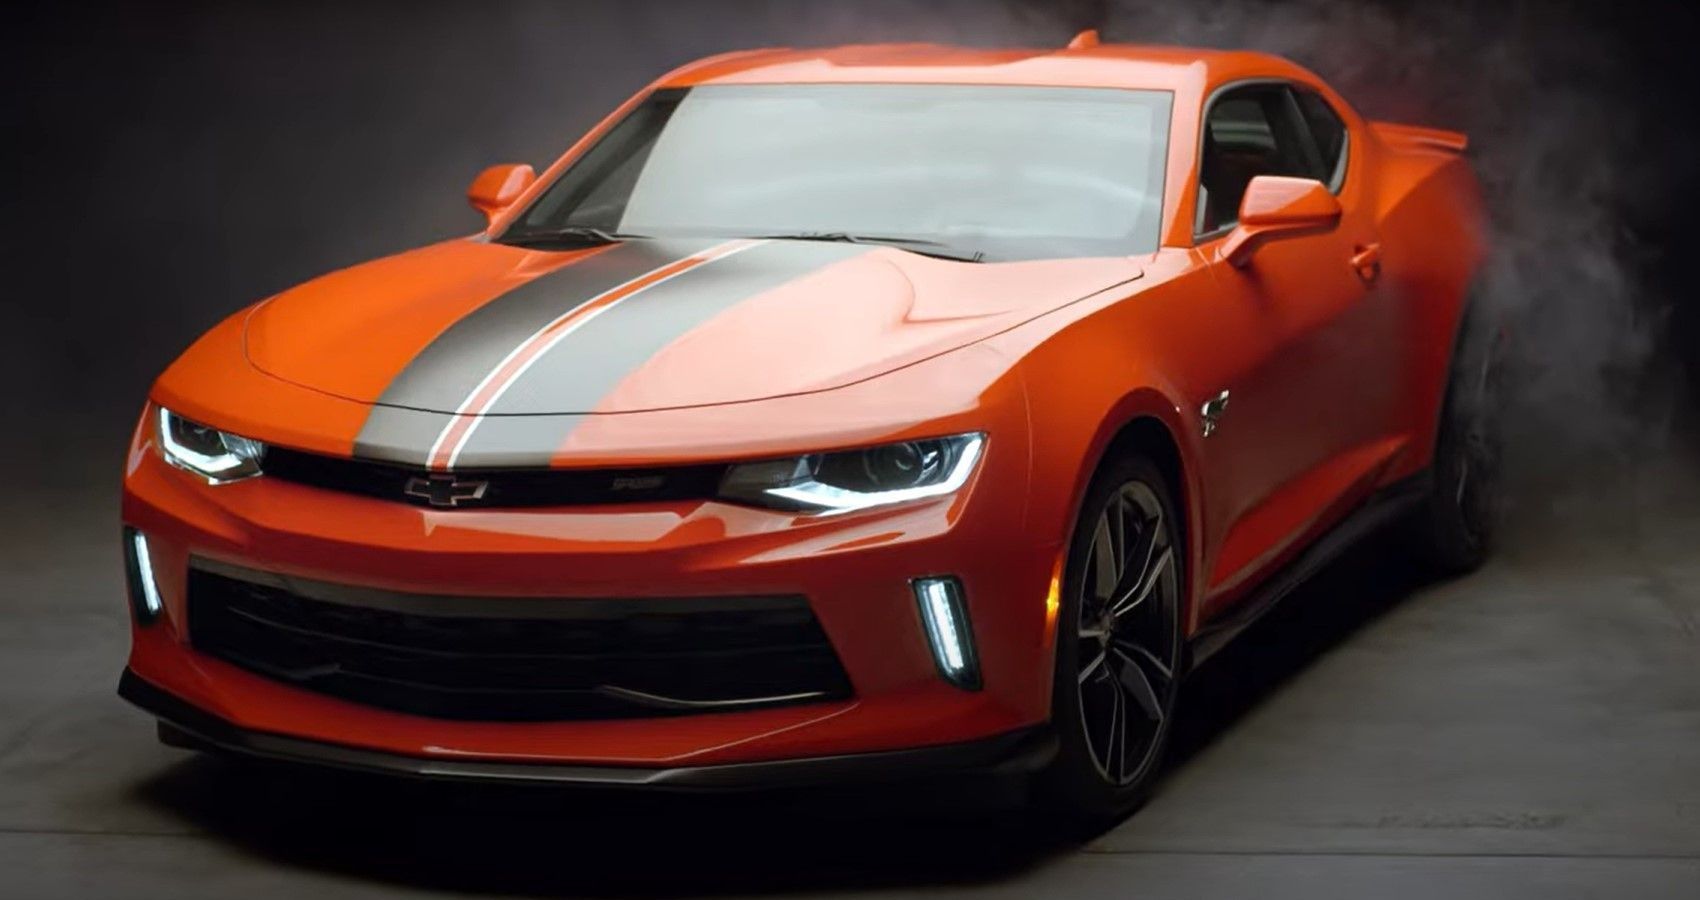 Chevrolet Says Goodbye To The Legendary Camaro With A Final "Collector